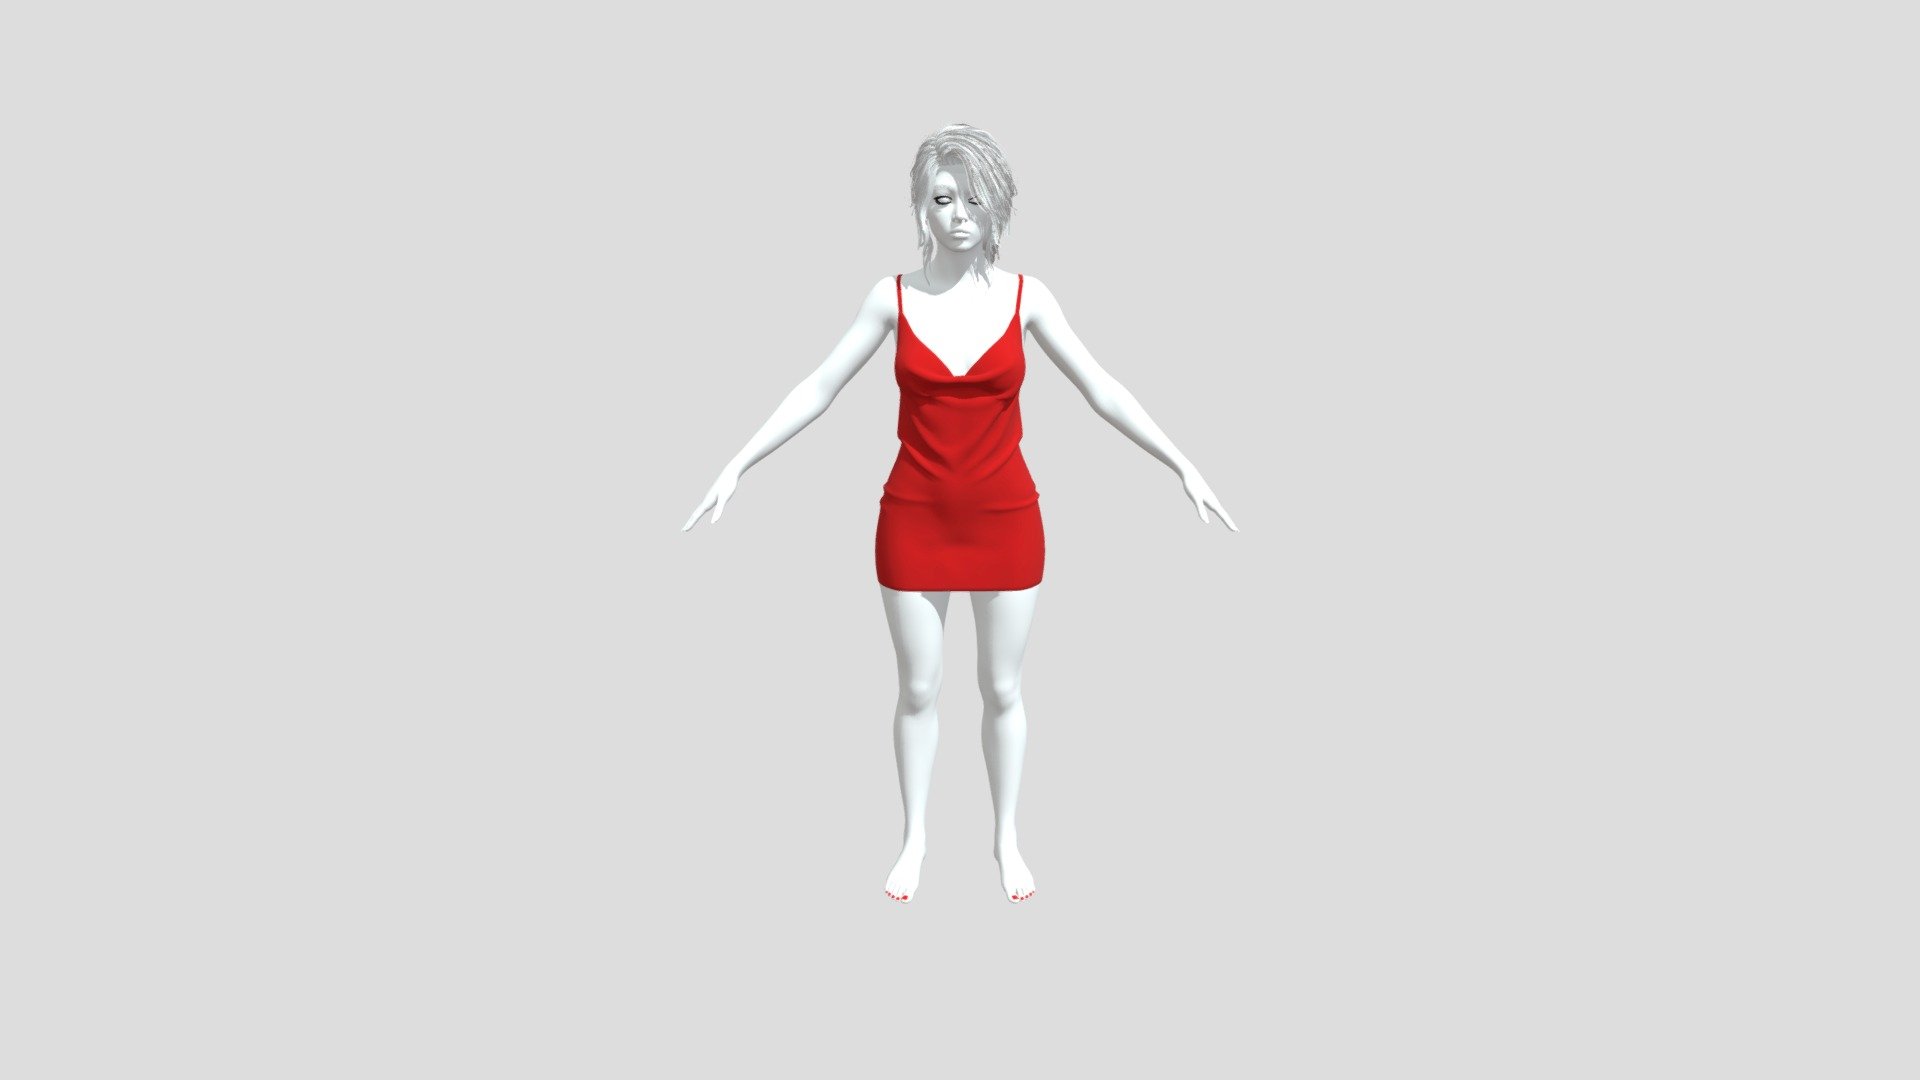 Realistic Female Model in Red Dresses - High-Quality 3D Model

Description:

This 3D model is an exquisite representation of a beautiful female model elegantly dressed in captivating red dresses. The meticulous attention to detail ensures a lifelike visual resemblance to a real person, making it a perfect choice for realistic renderings and visualizations.

Fully Rigged for Animation:

The fully rigged design allows for seamless movement and animation of the character, making it effortless to bring your creative ideas to life. The advanced rigging system enables lifelike posing and smooth animation transitions, ideal for creating captivating scenes and animations.

Technical Details:
- Formats: [List compatible formats here]
- Textures: 4K and 8K resolutions
- Rigged: Yes
- Vertices: [Provide vertex count]
- Faces: [Provide face count]
- UV Mapped: Yes
- Materials: Yes - Realistic Beautiful Female Model in Red Dresses - 3D model by svetjekolem 3d model